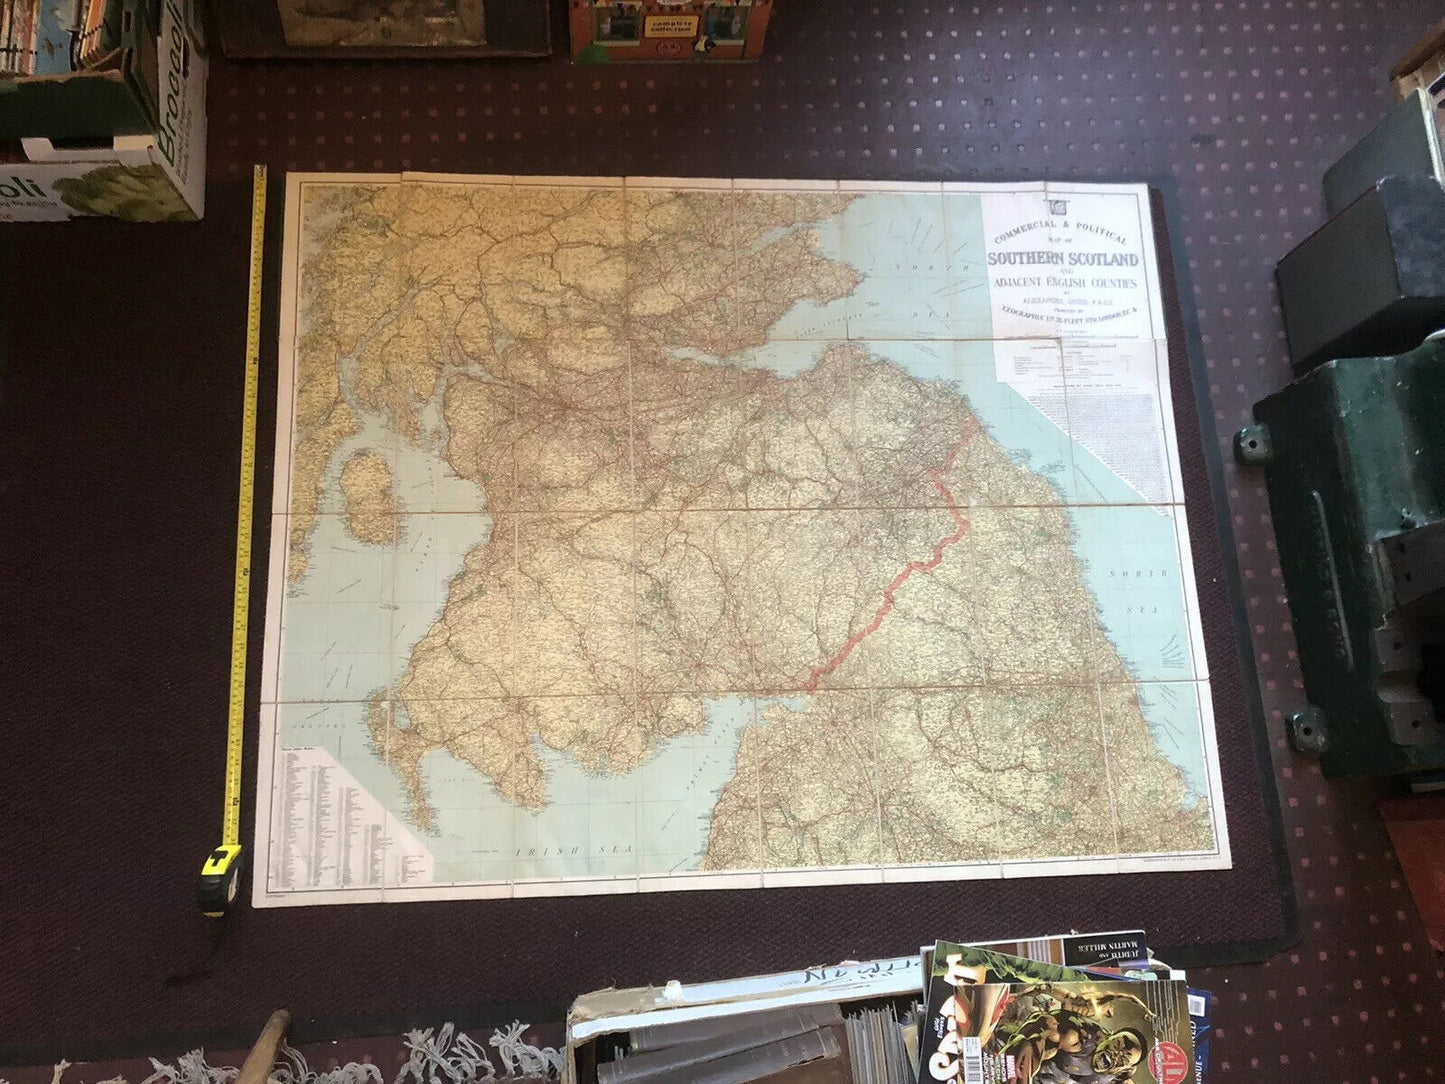 Geographia Map of Southern Scotland and Adjacent English Counties (132 x 104cm)